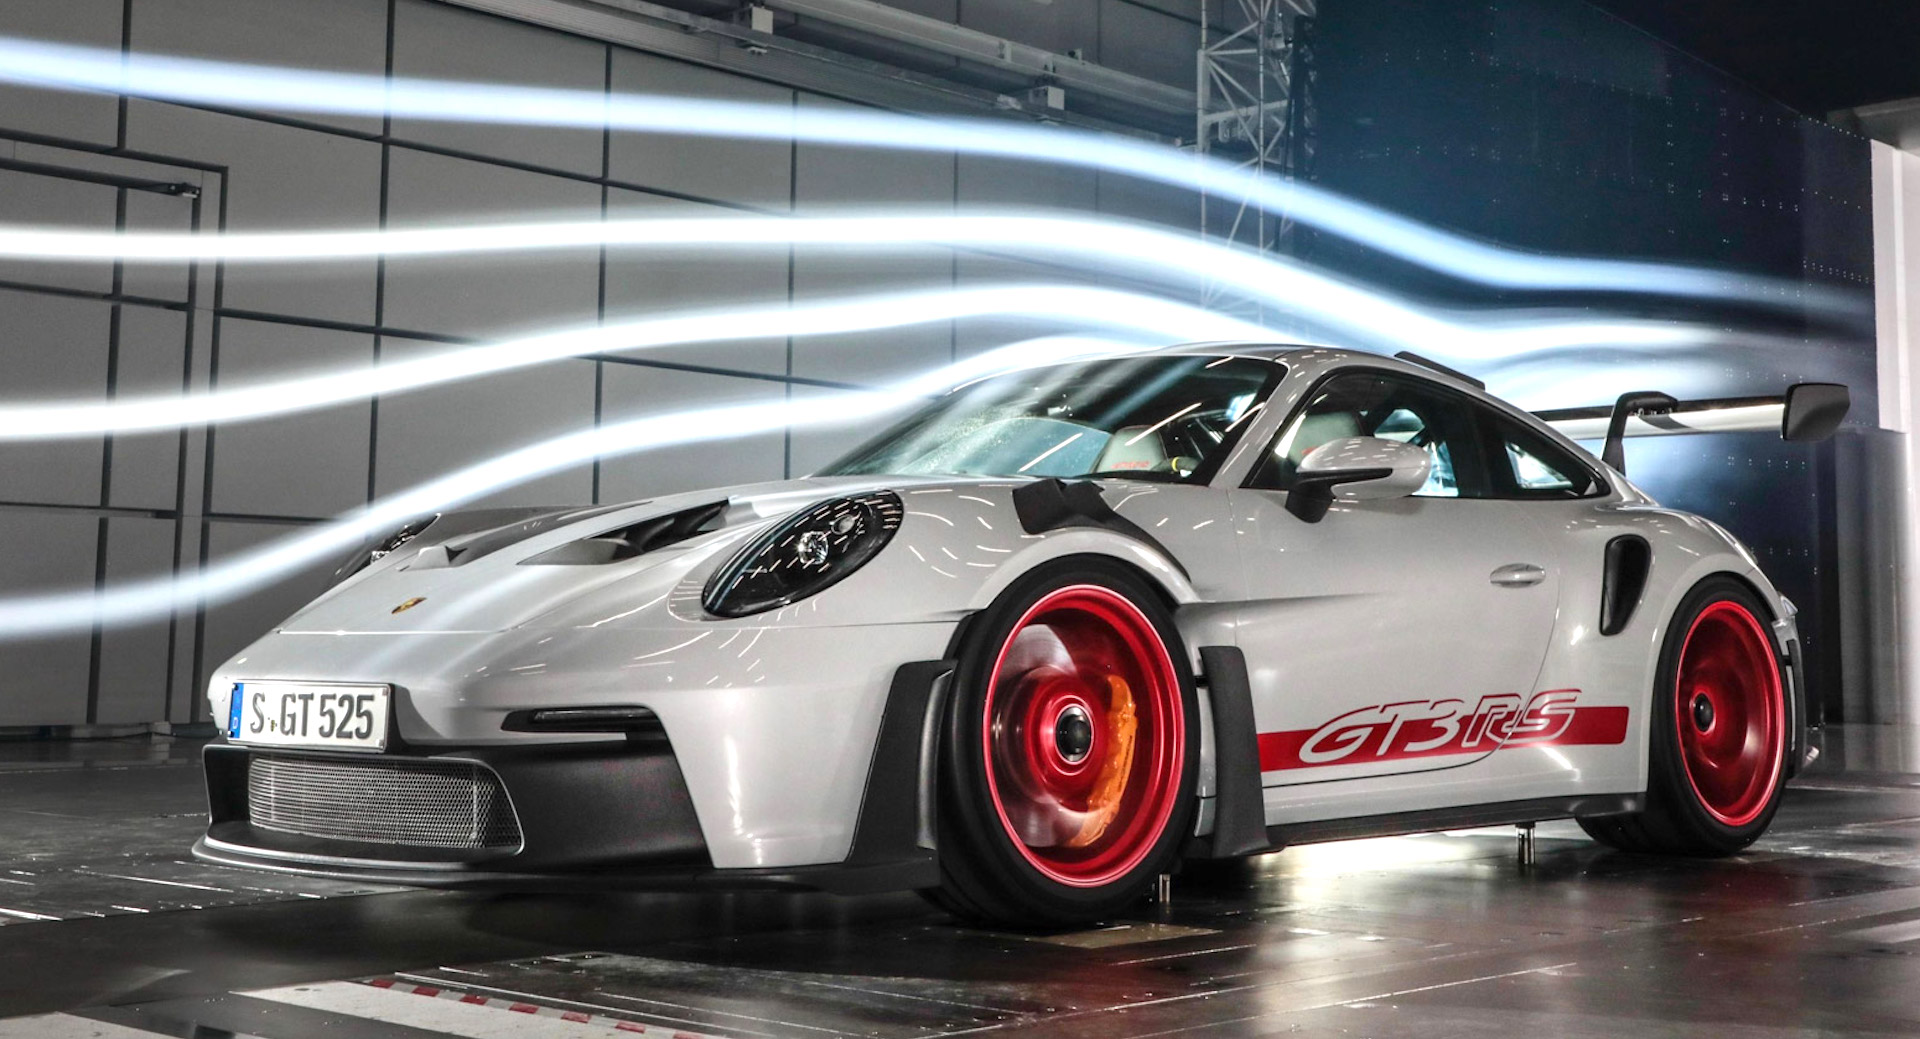 The 23 Porsche 911 Gt3 Rs Is 518 Hp Motorsport Car You Can Drive Down Main Street Carscoops